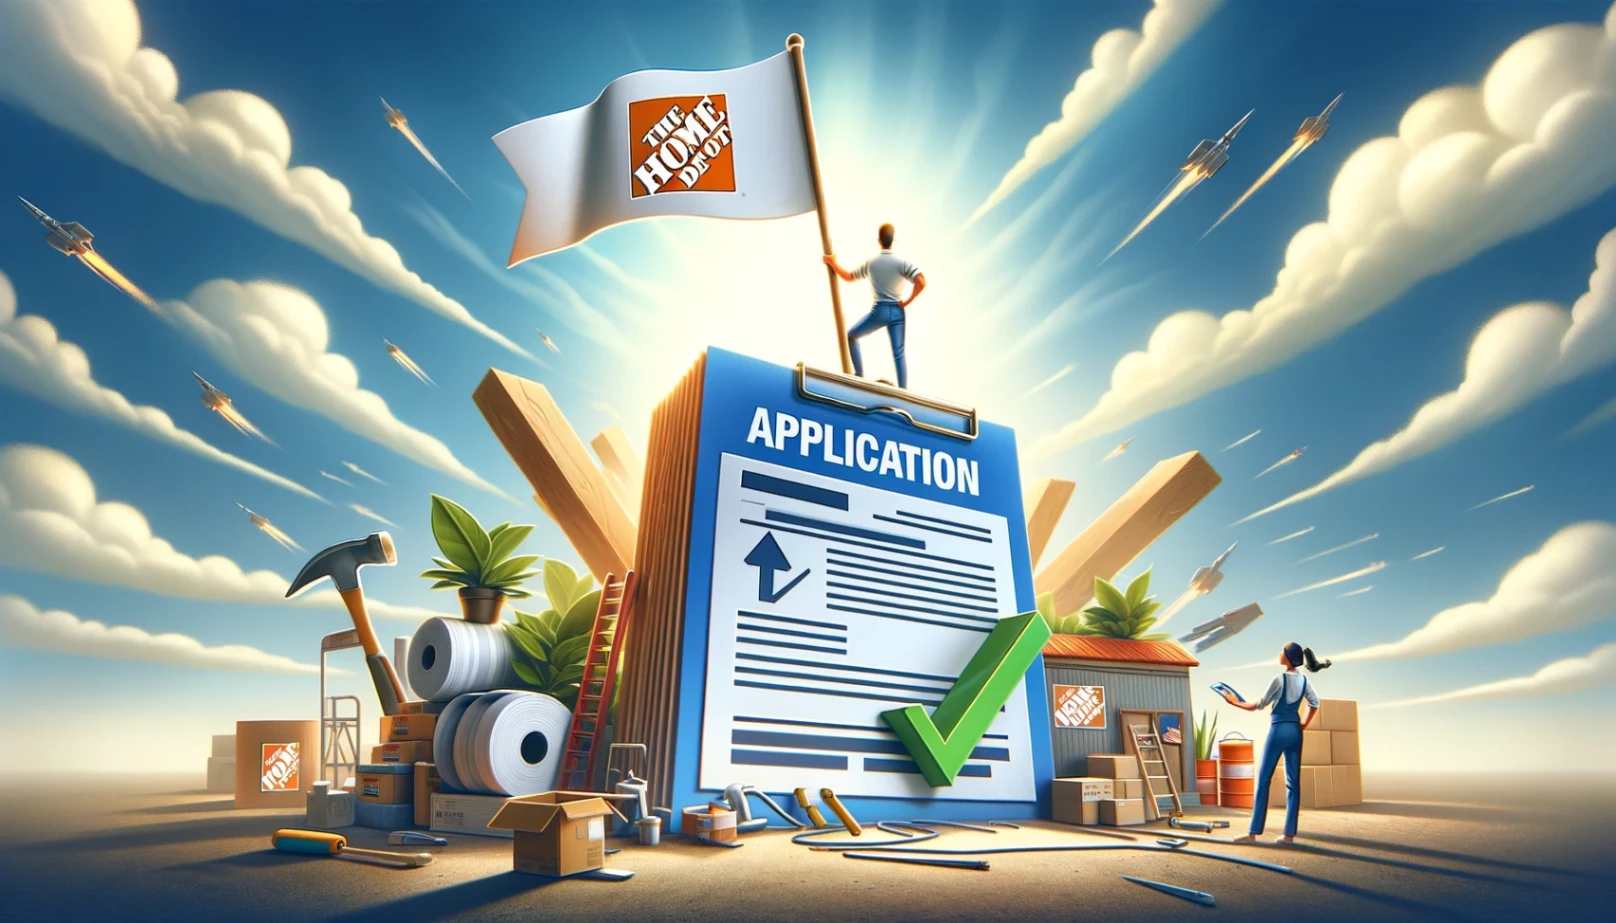 Dominate the Home Depot Application Process: Do's and Don'ts